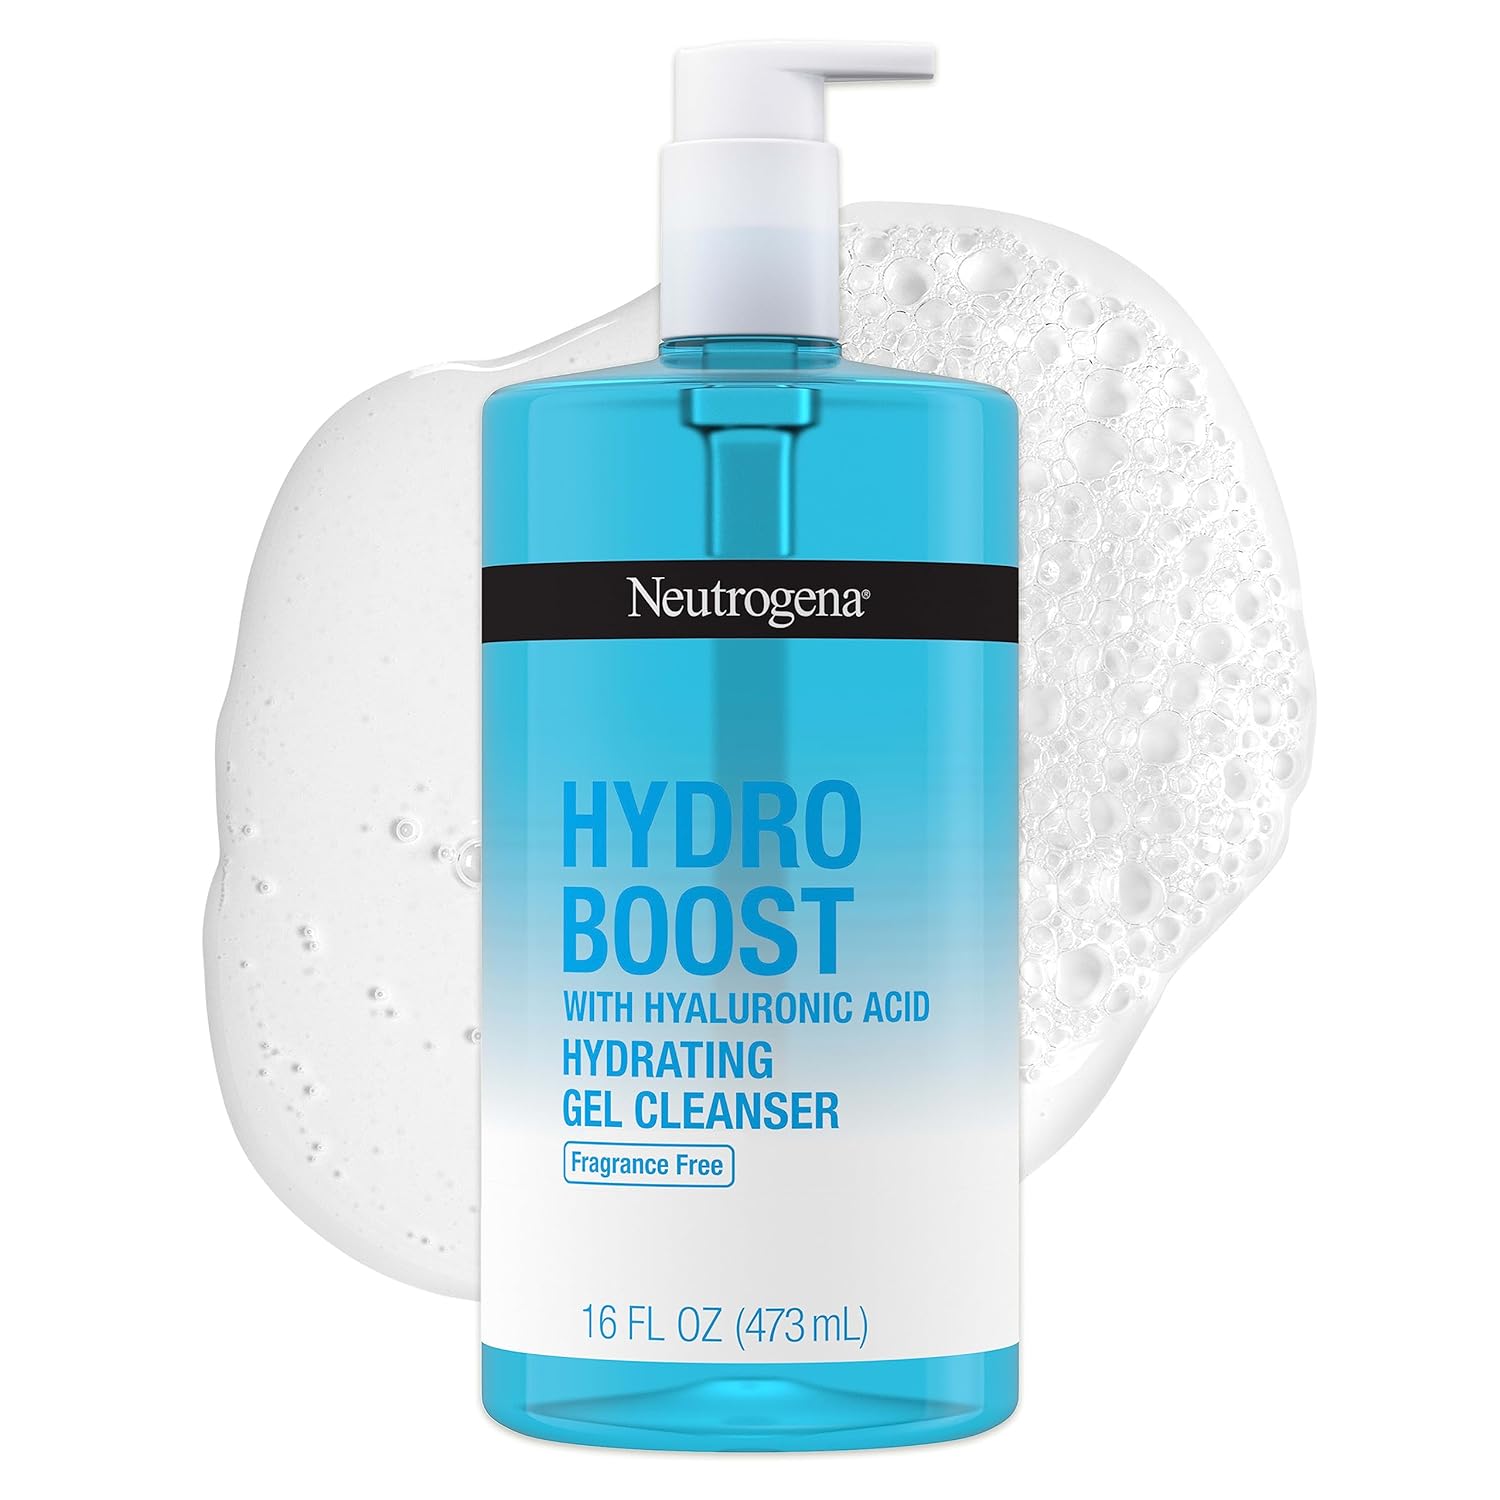 Neutrogena Hydro Boost Fragrance Free Hydrating Gel Facial Cleanser with Hyaluronic Acid, Daily Foaming Face Wash & Makeup Remover, Gentle Face Wash, Non-Comedogenic, 16 fl. oz